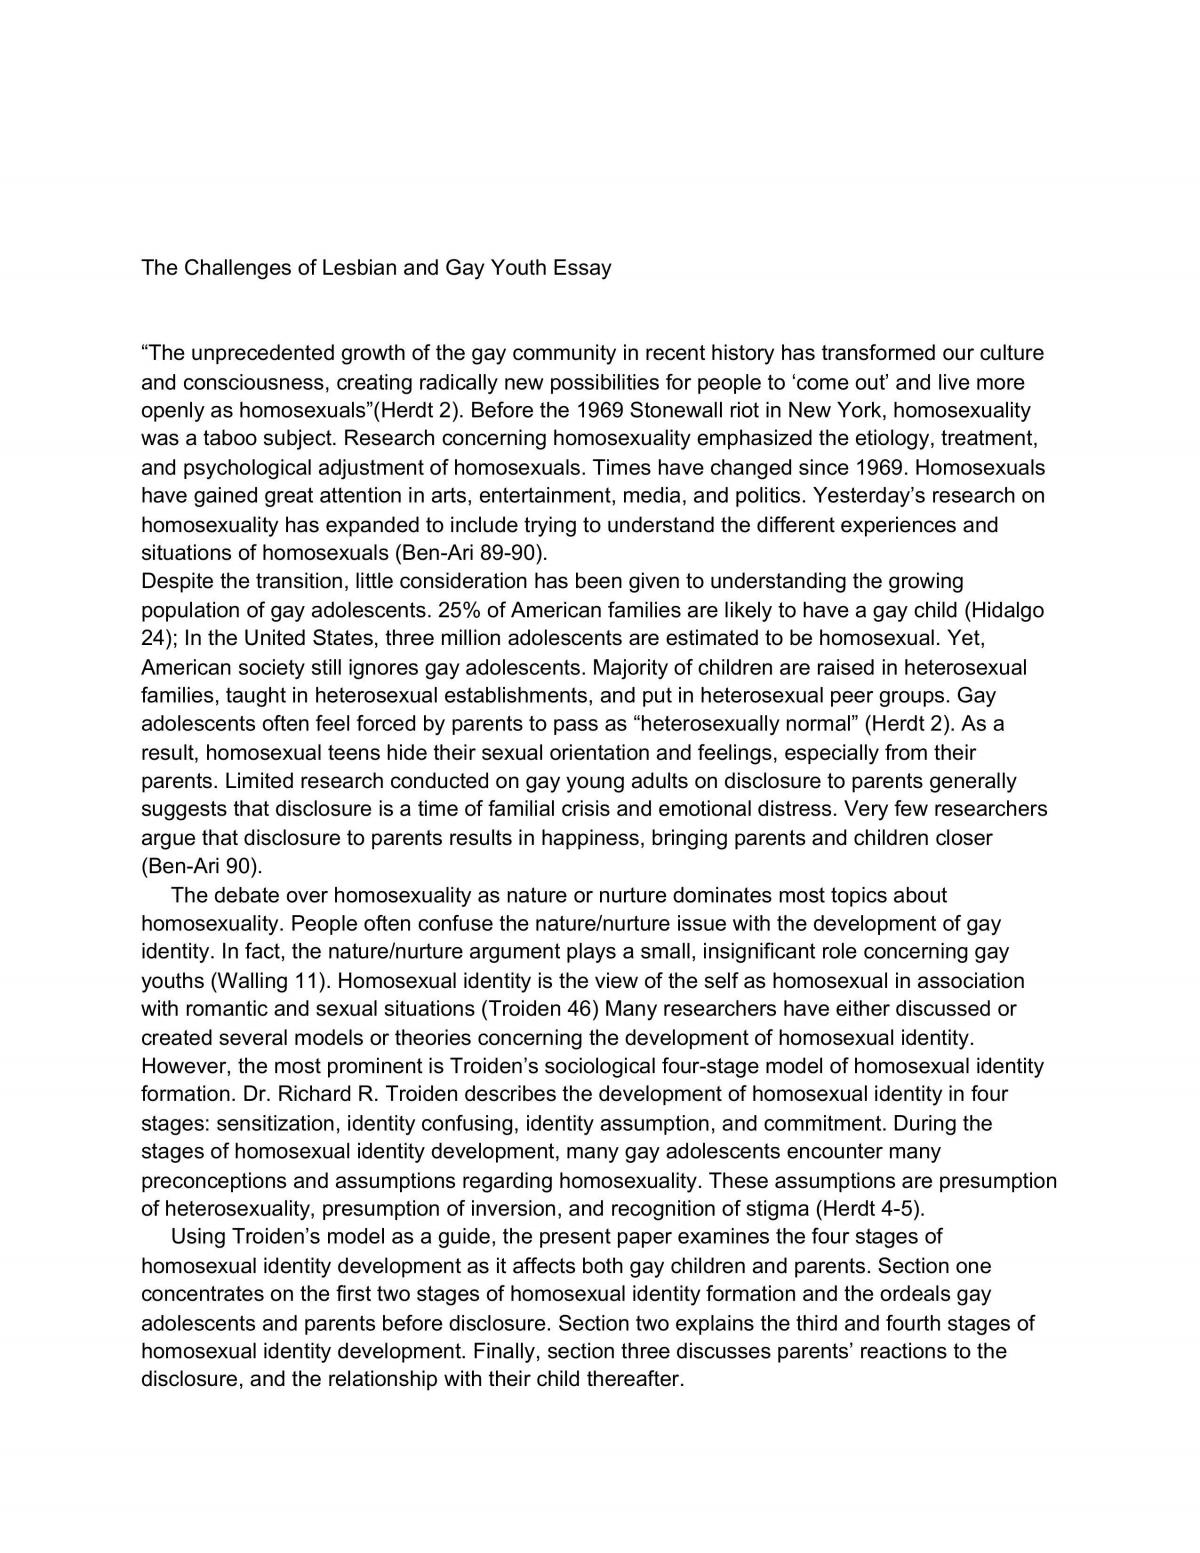 The Challenges of Lesbian and Gay Youth Essay - Page 1